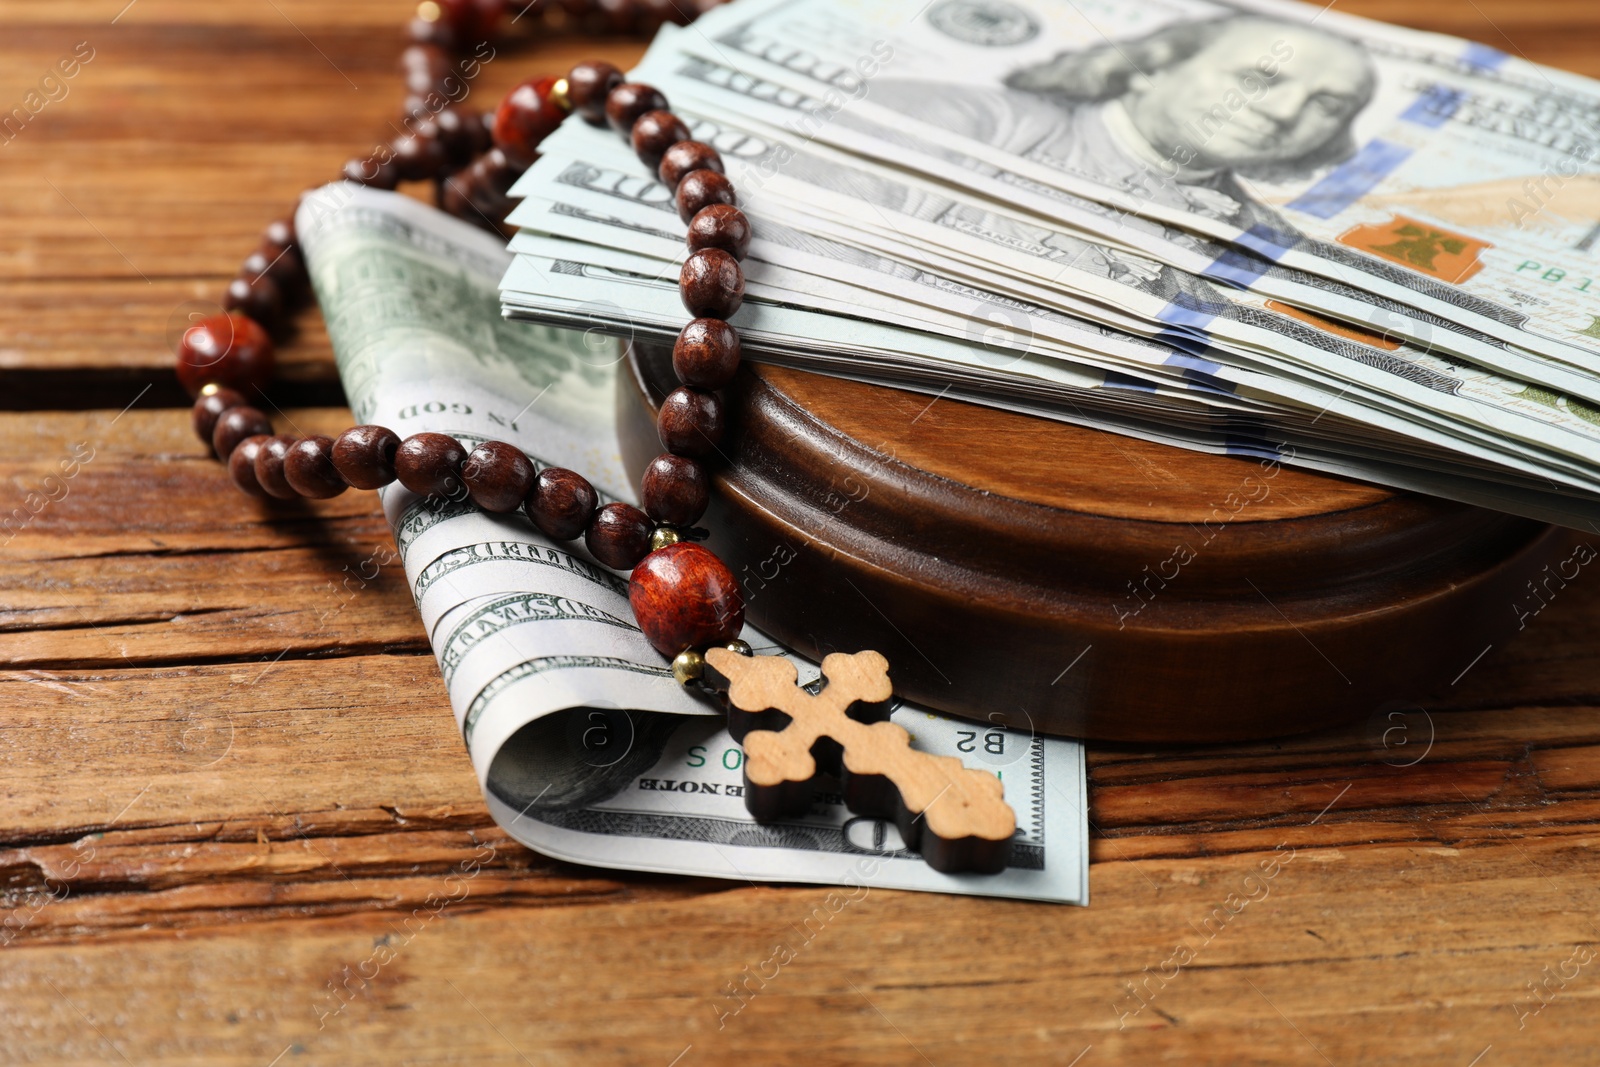 Photo of Cross and money on wooden table, closeup